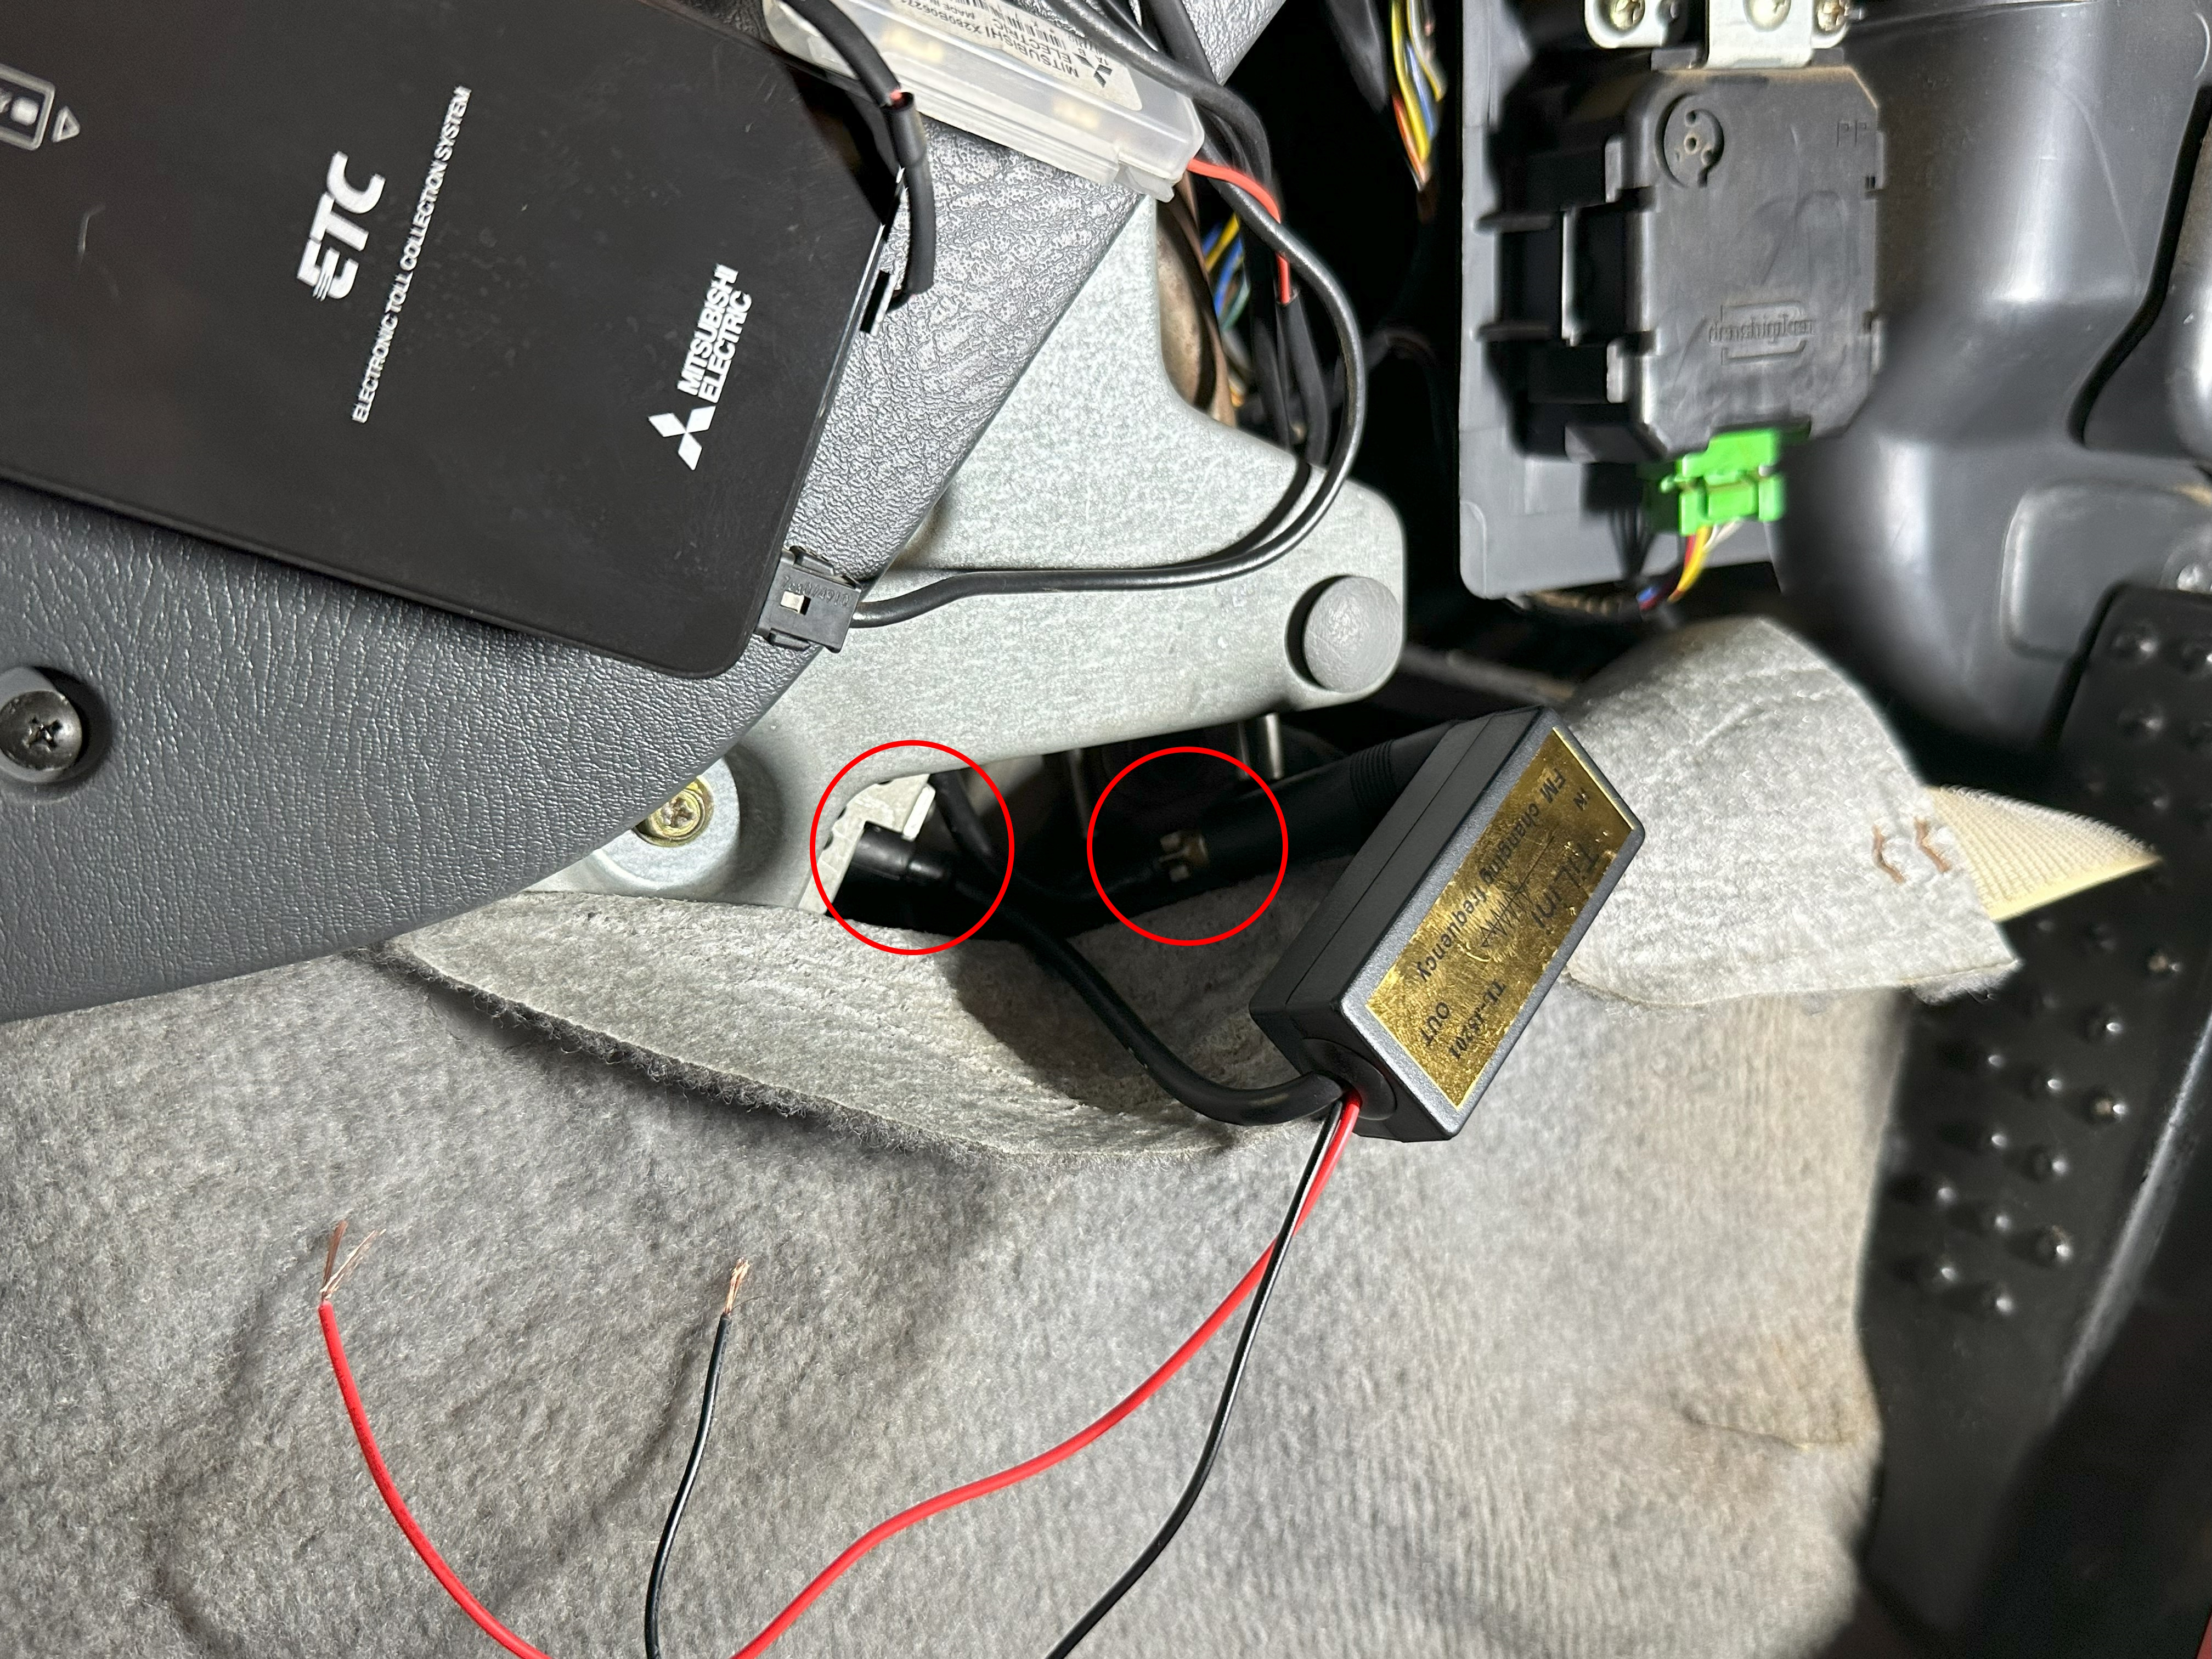 Picture of the band expander plugged into the head unit and antenna cable.